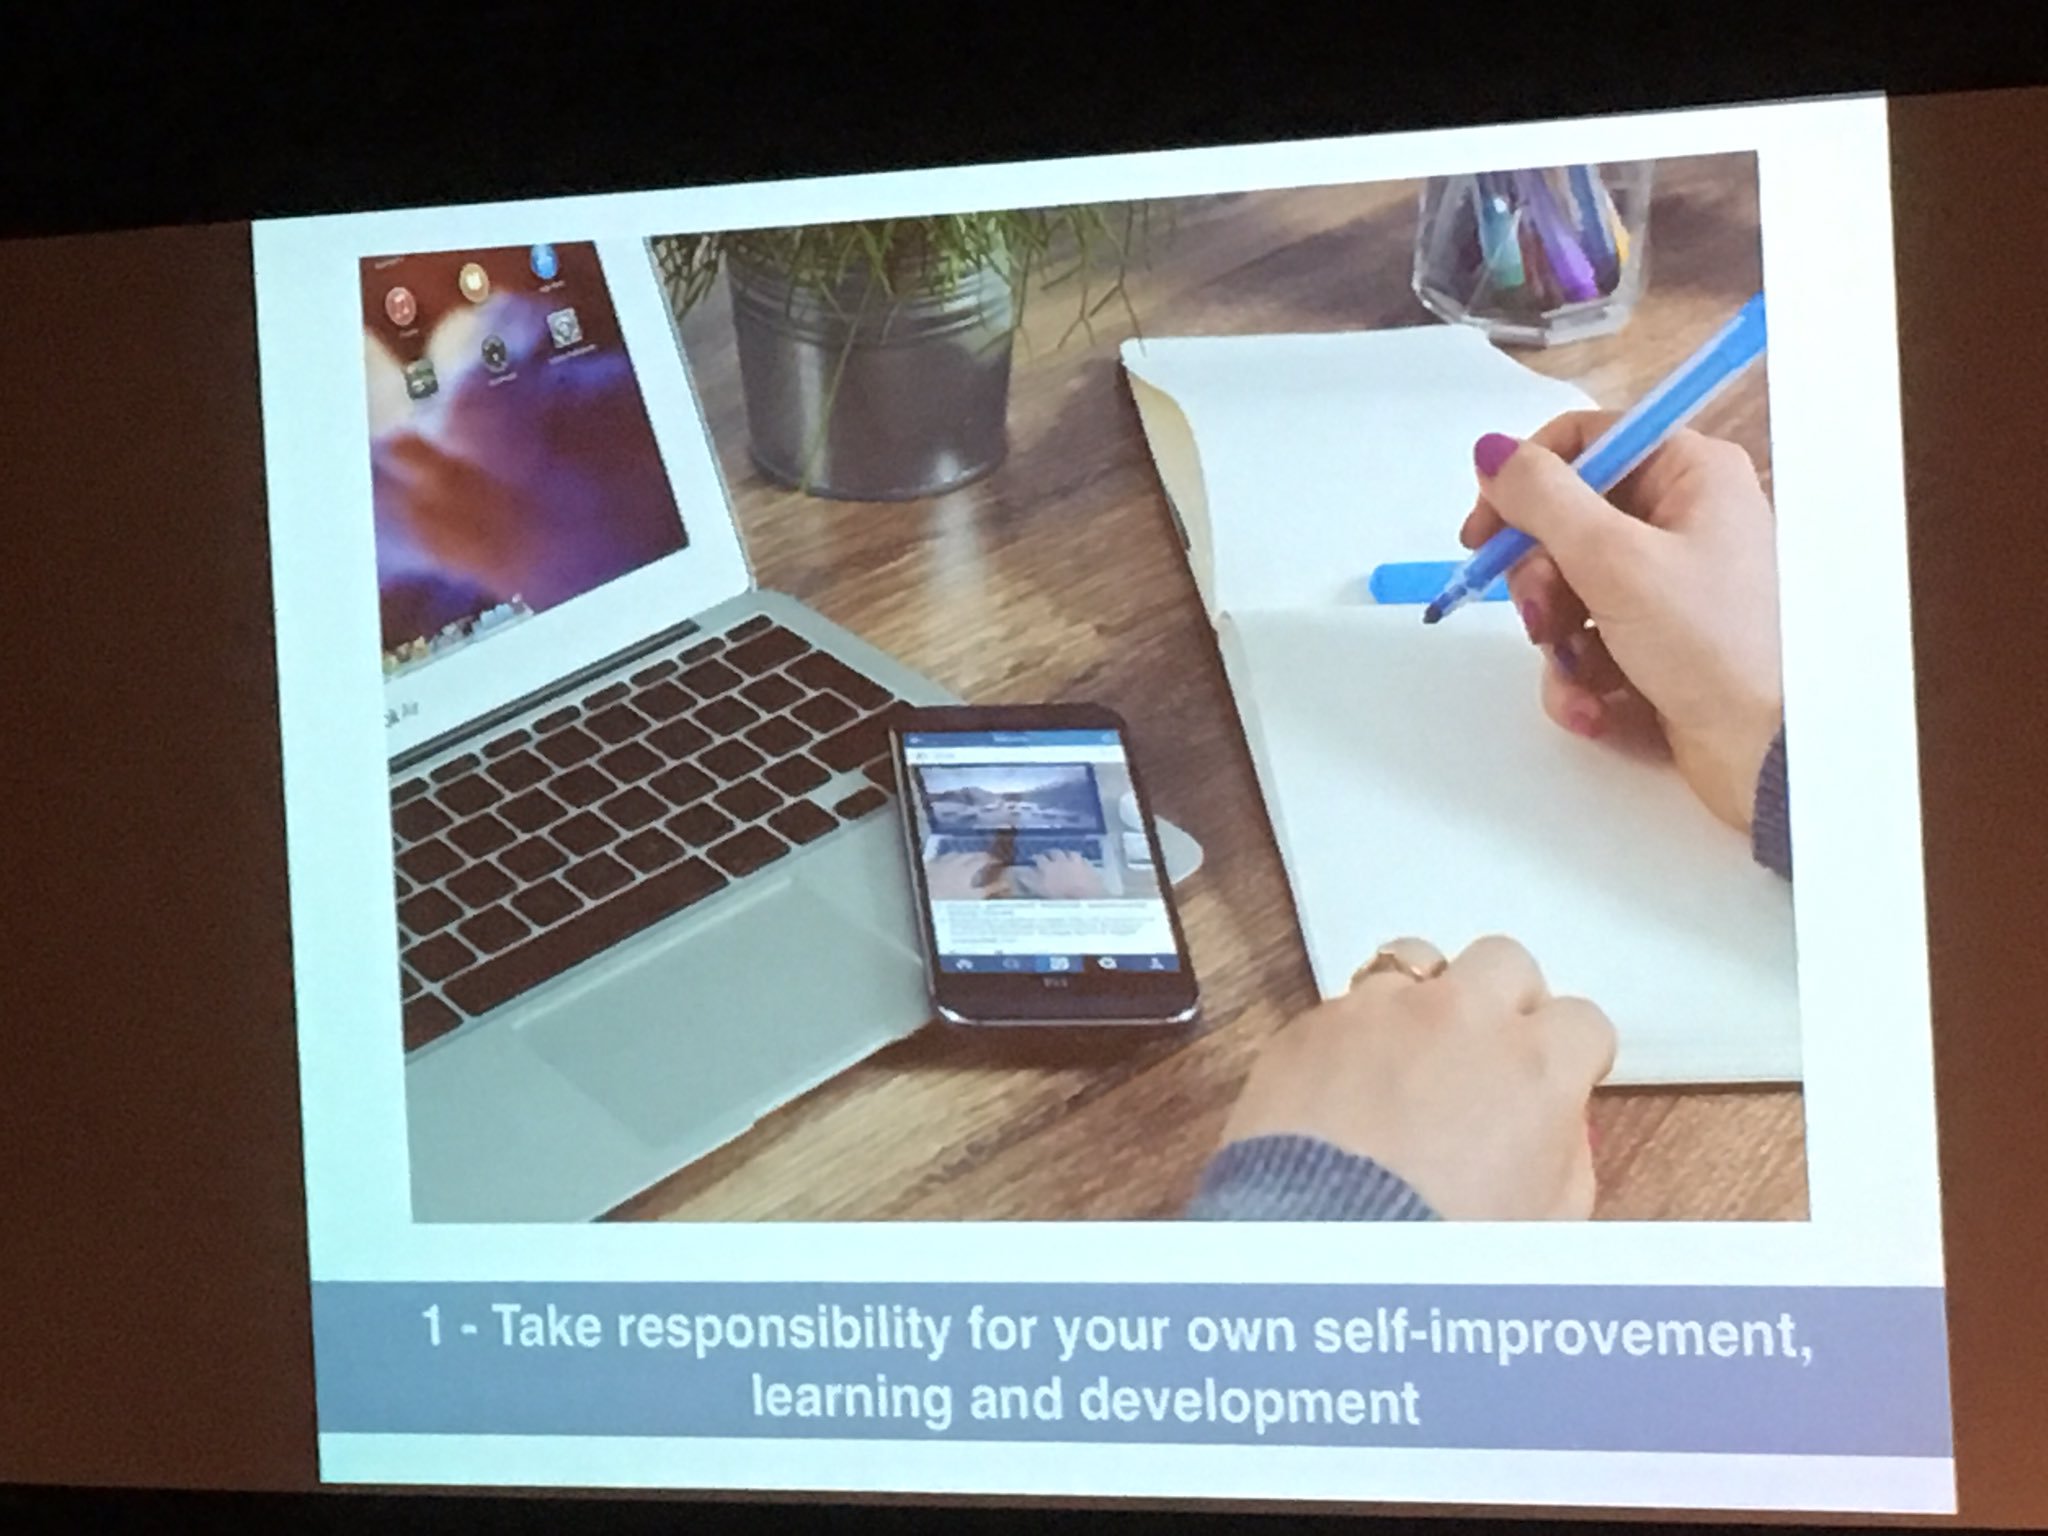 @C4LPT guideline 1 is take responsibility for your own self improvement. Google apparently looking for learning animals! #SUSALT17 https://t.co/cqzsz4ta74